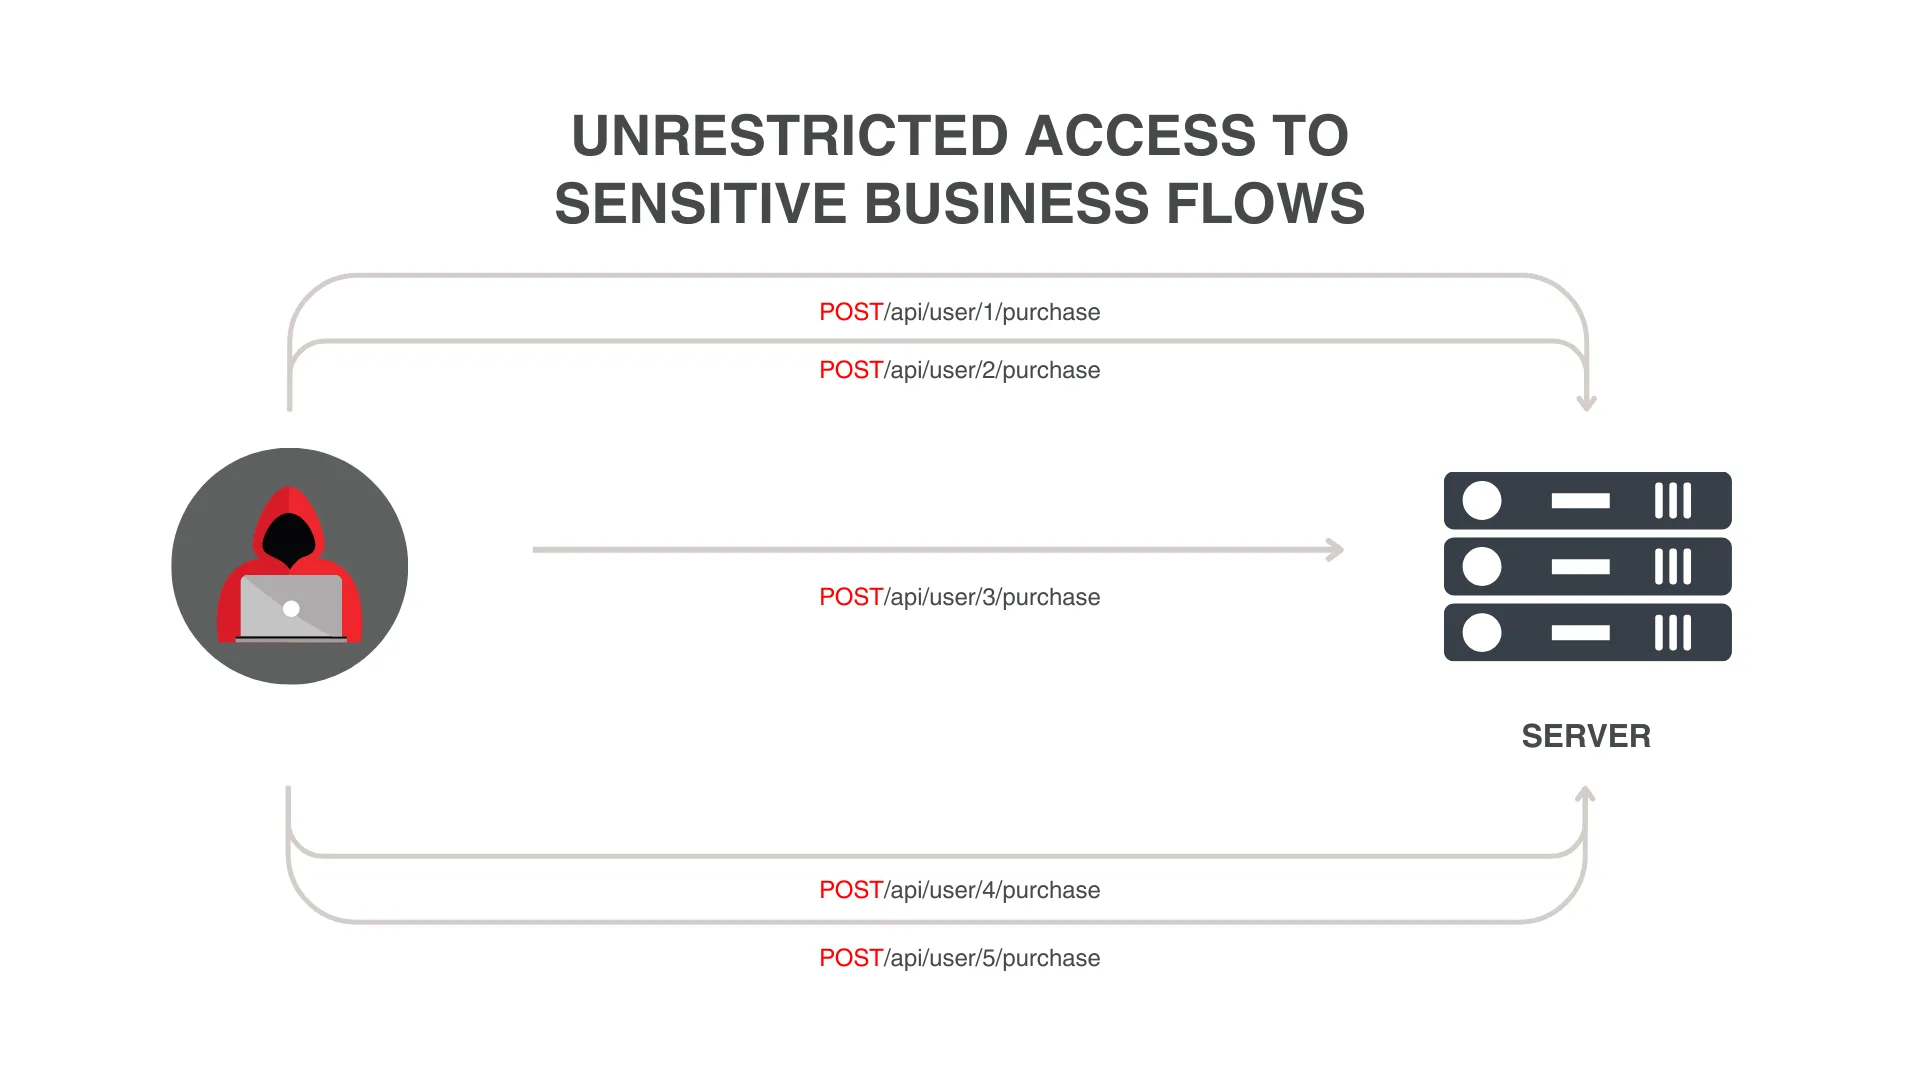 Unrestricted Access to Sensitive Business Flows